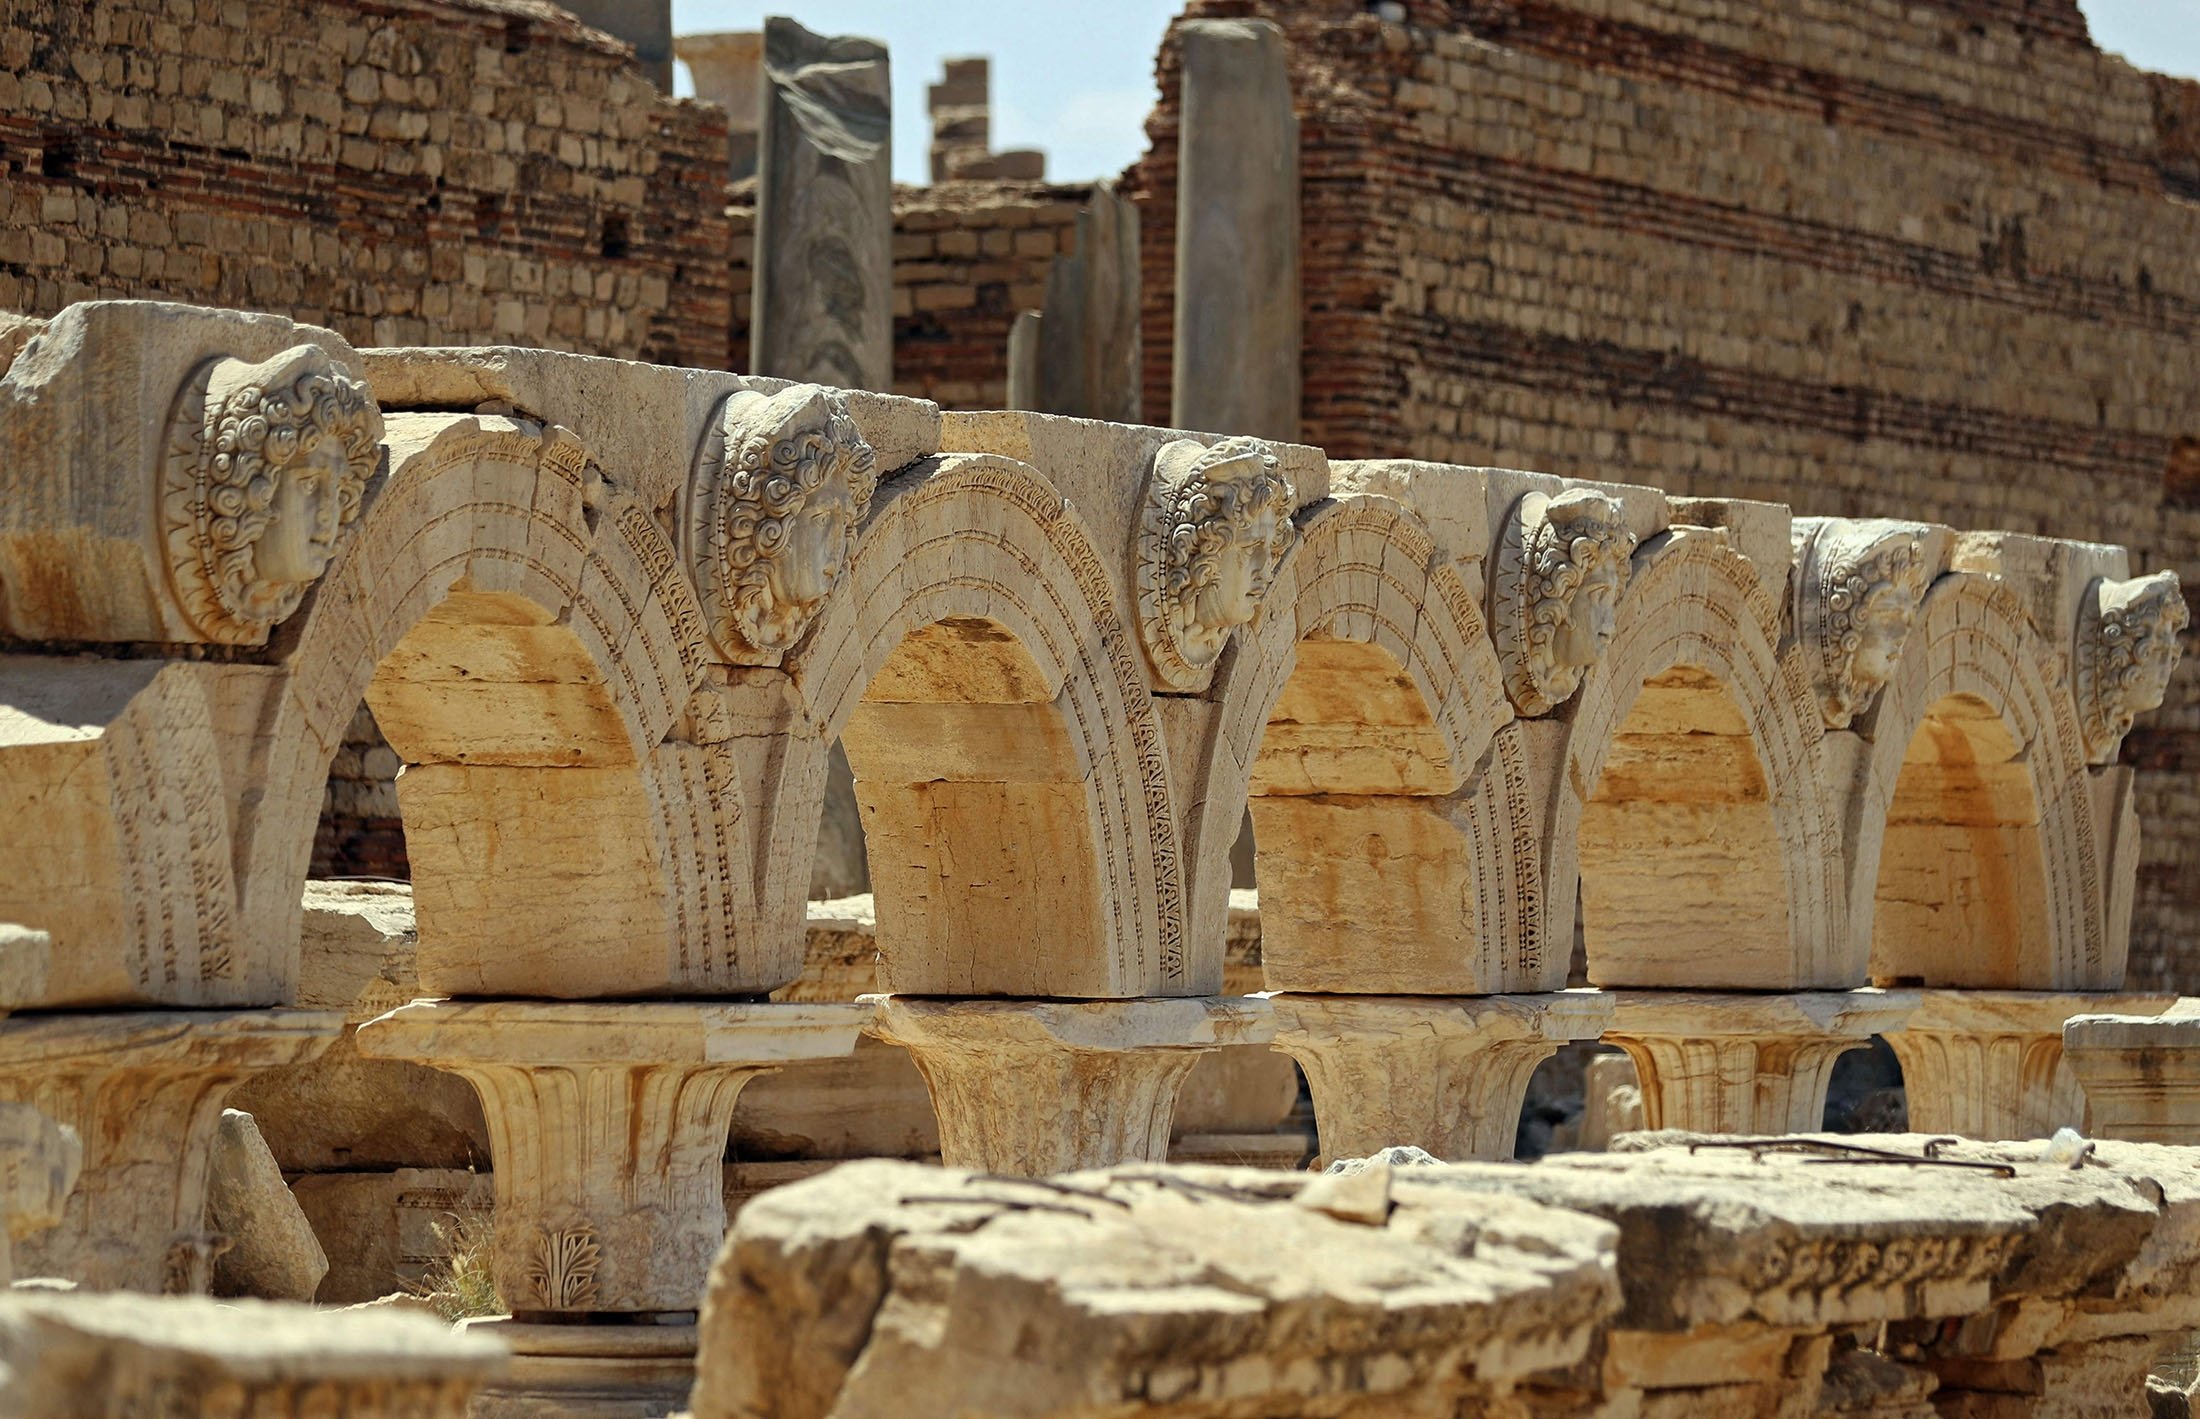 Arches bearing carved Gorgon heads surrounding the Severin forum, in the ancient Roman city of Leptis Magna near the coastal city of Al-Khums, Libya, Aug. 24, 2021. (AFP Photo)